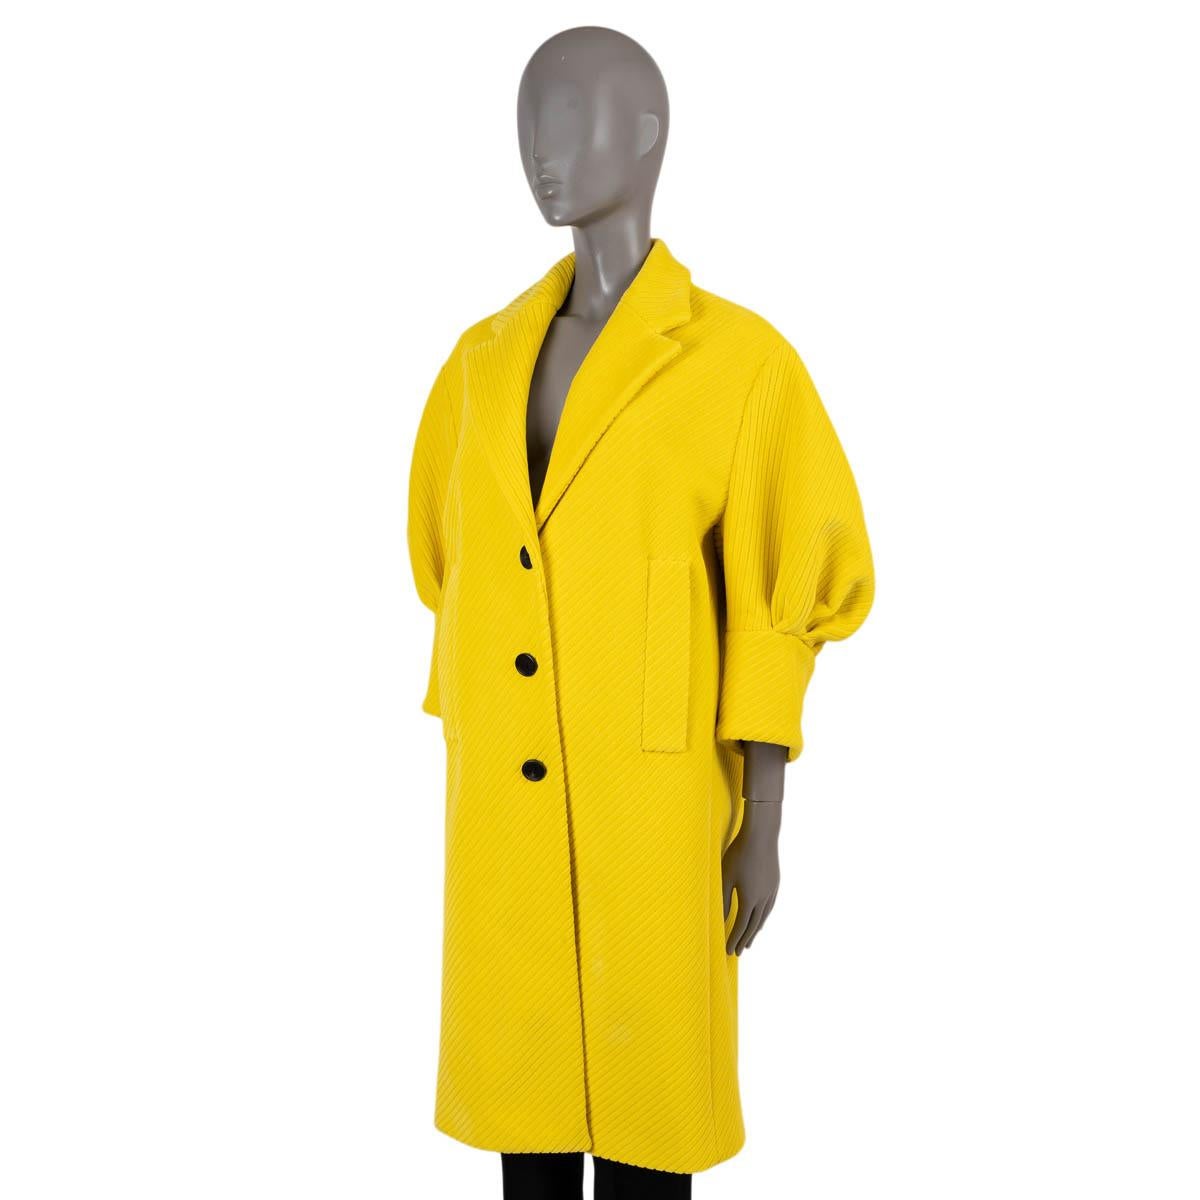 100% authentic Prada puff-sleeve coat in canary yellow corduroy velvet (cotton with 10% polyester). Features wide peak lapels, two welt pockets and central rear vent. Closes with buttons on the front and is lined in viscose (100%). Has been carried